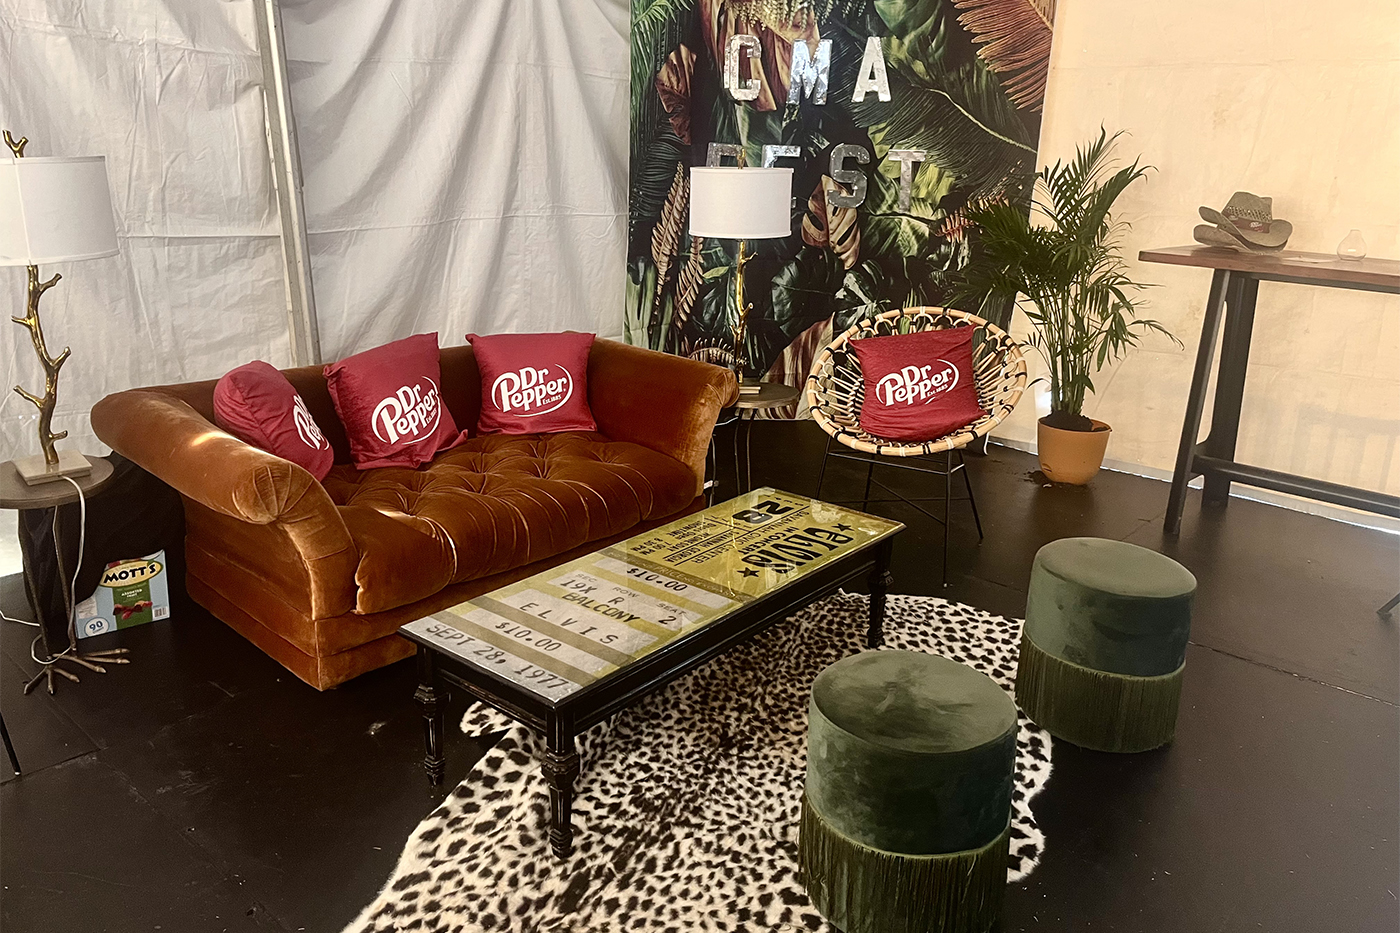 Dr Pepper throw pillows on a couch on top of a leopard print rug